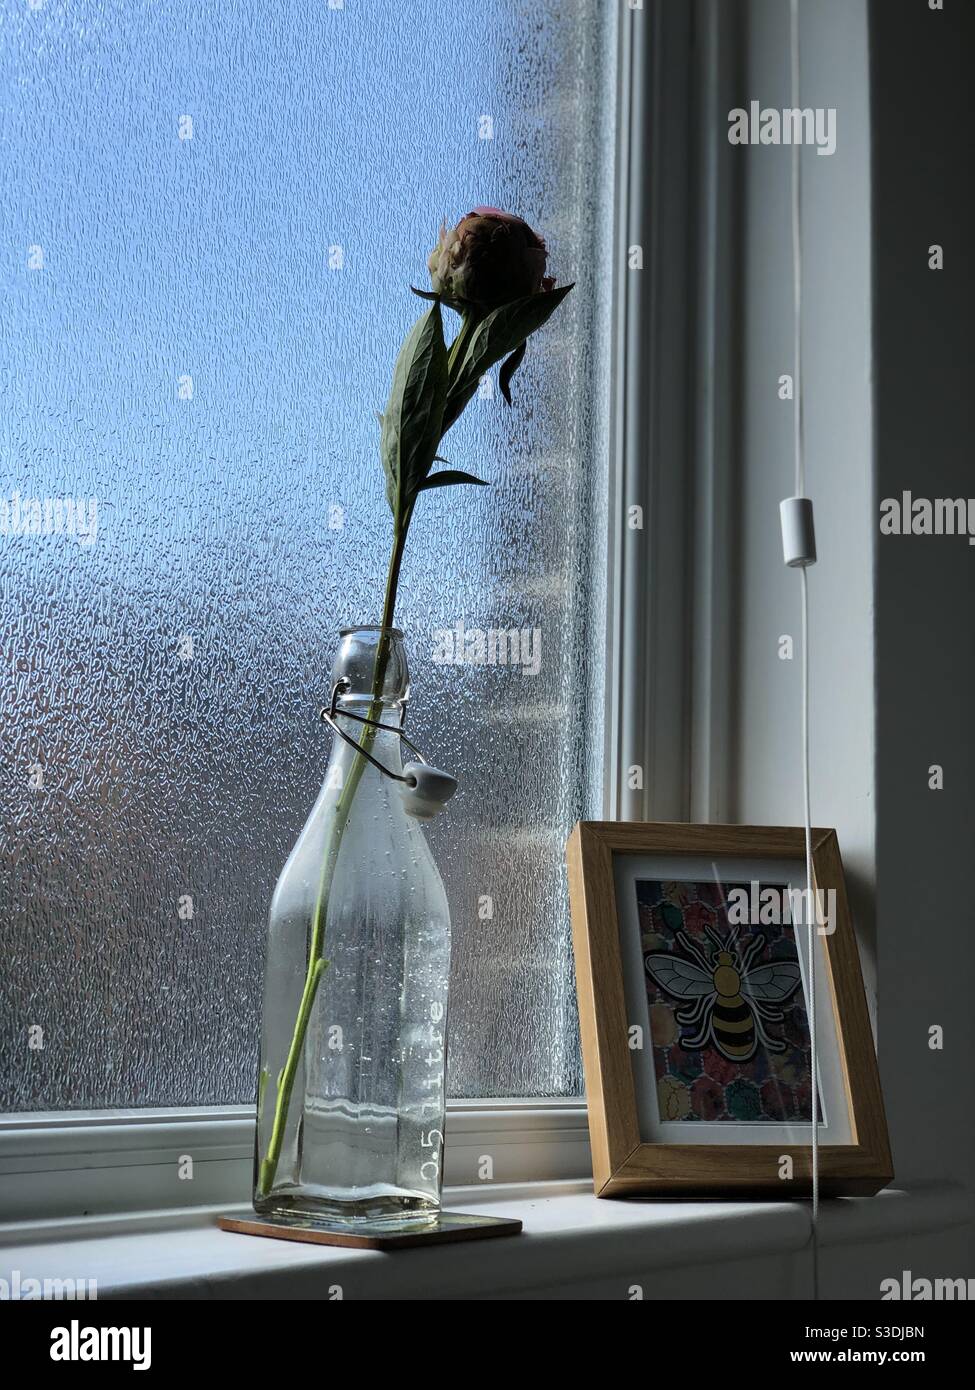 Closed peony in a bottle on a window next to a framed bee illustration Stock Photo